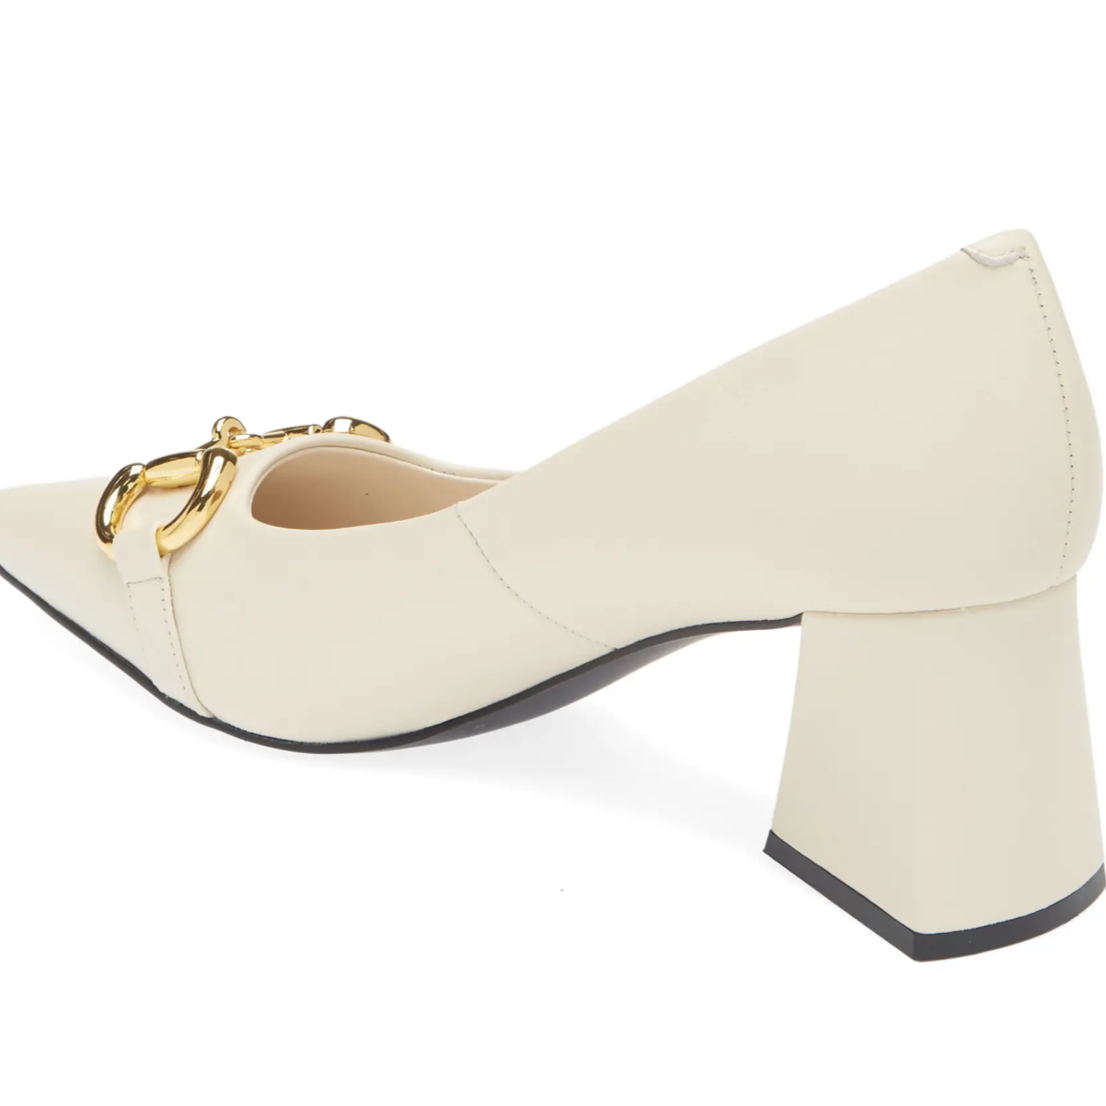 JEFFREY CAMPBELL HAPPY HOUR - MH IVORY